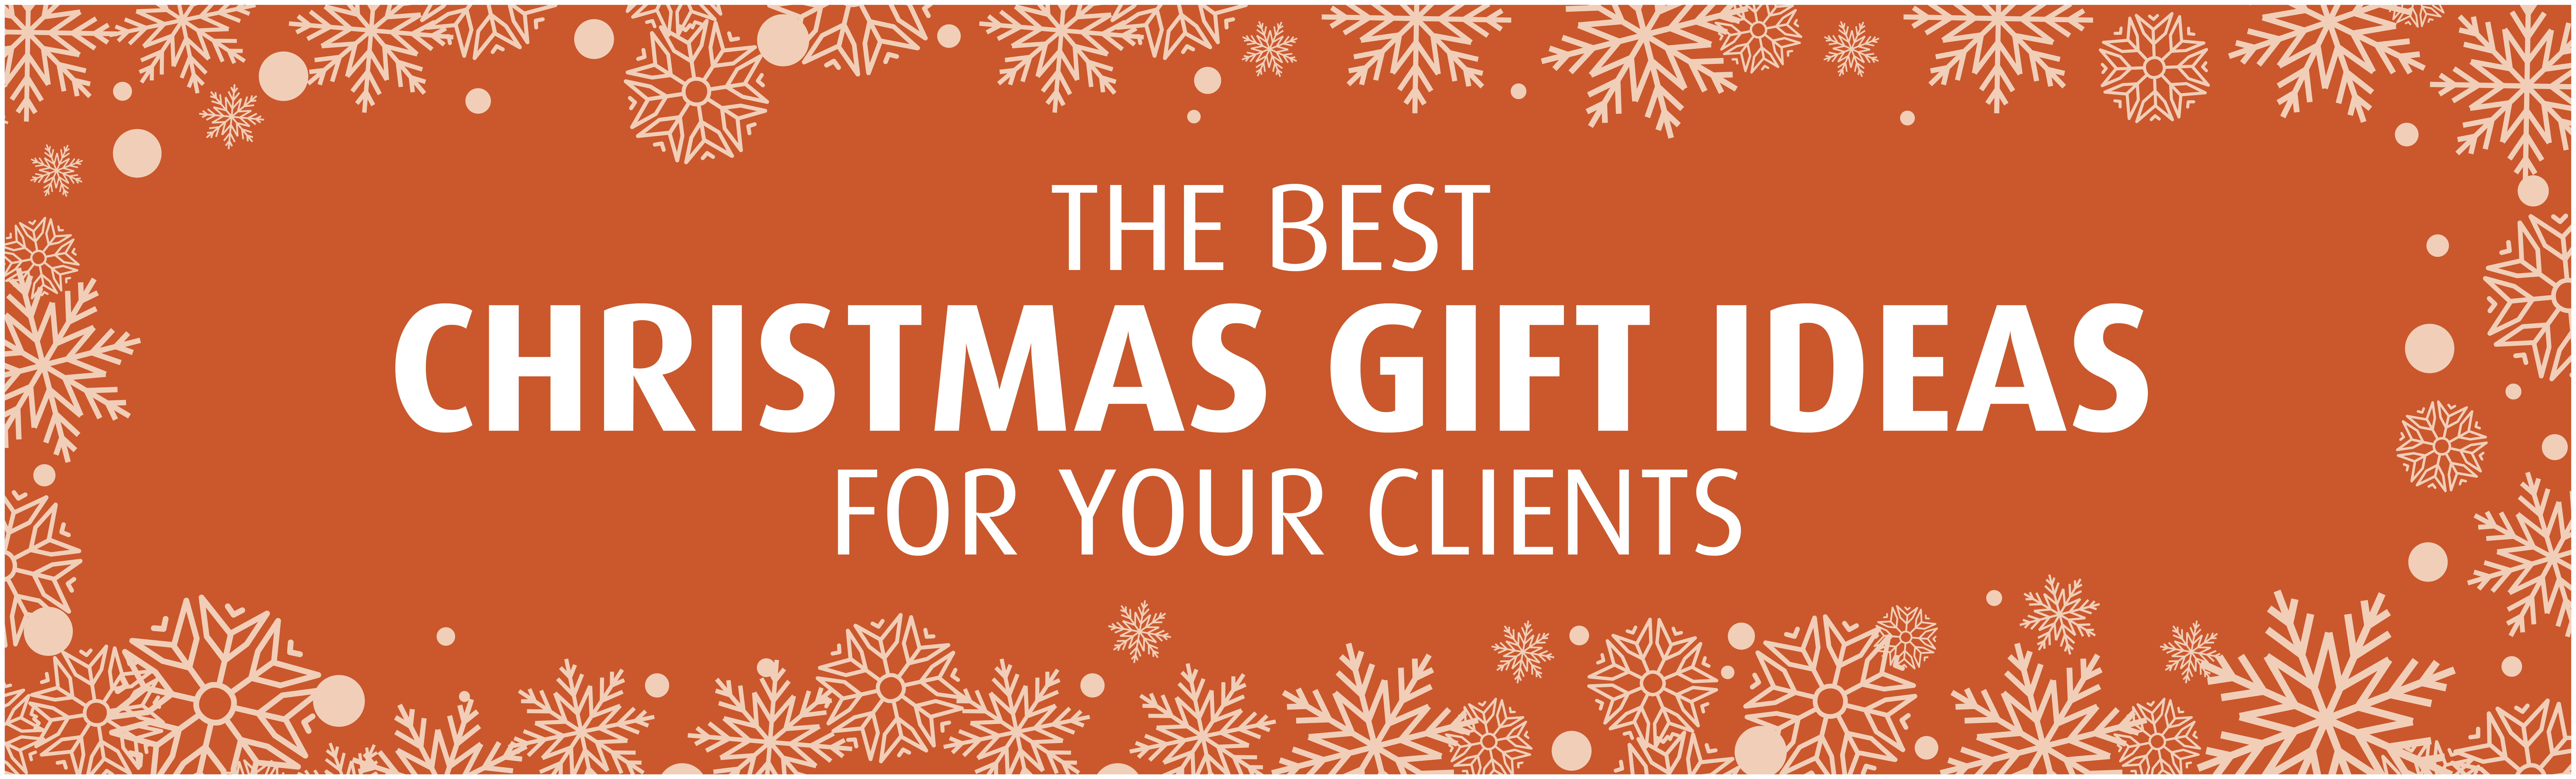 Promotional Christmas Gifts The Best Christmas Gift Ideas For Clients